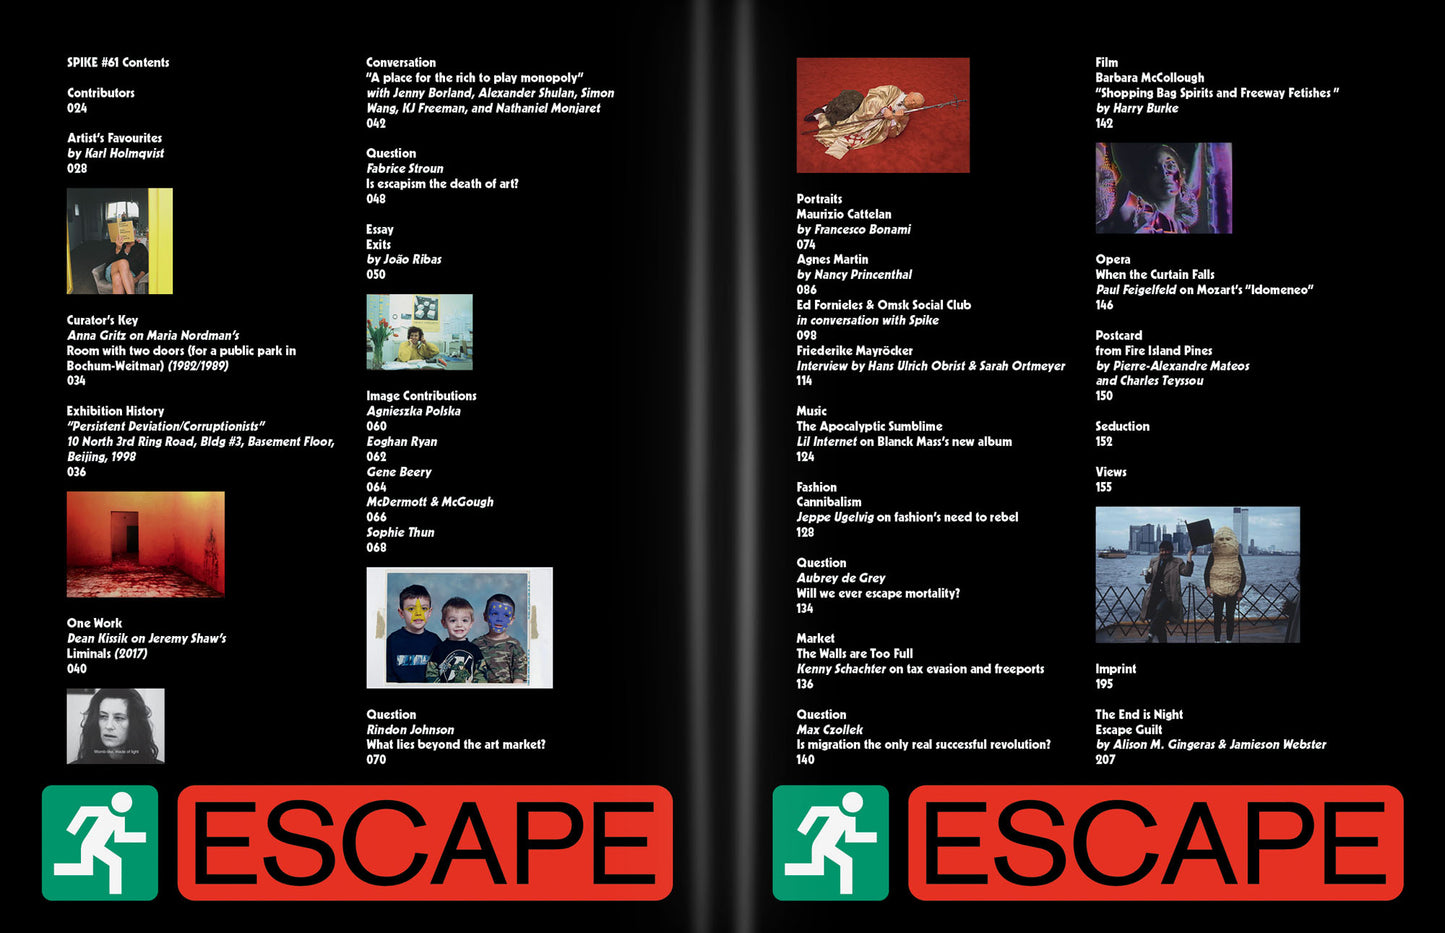 Spike ePaper (Issue 61): Escape